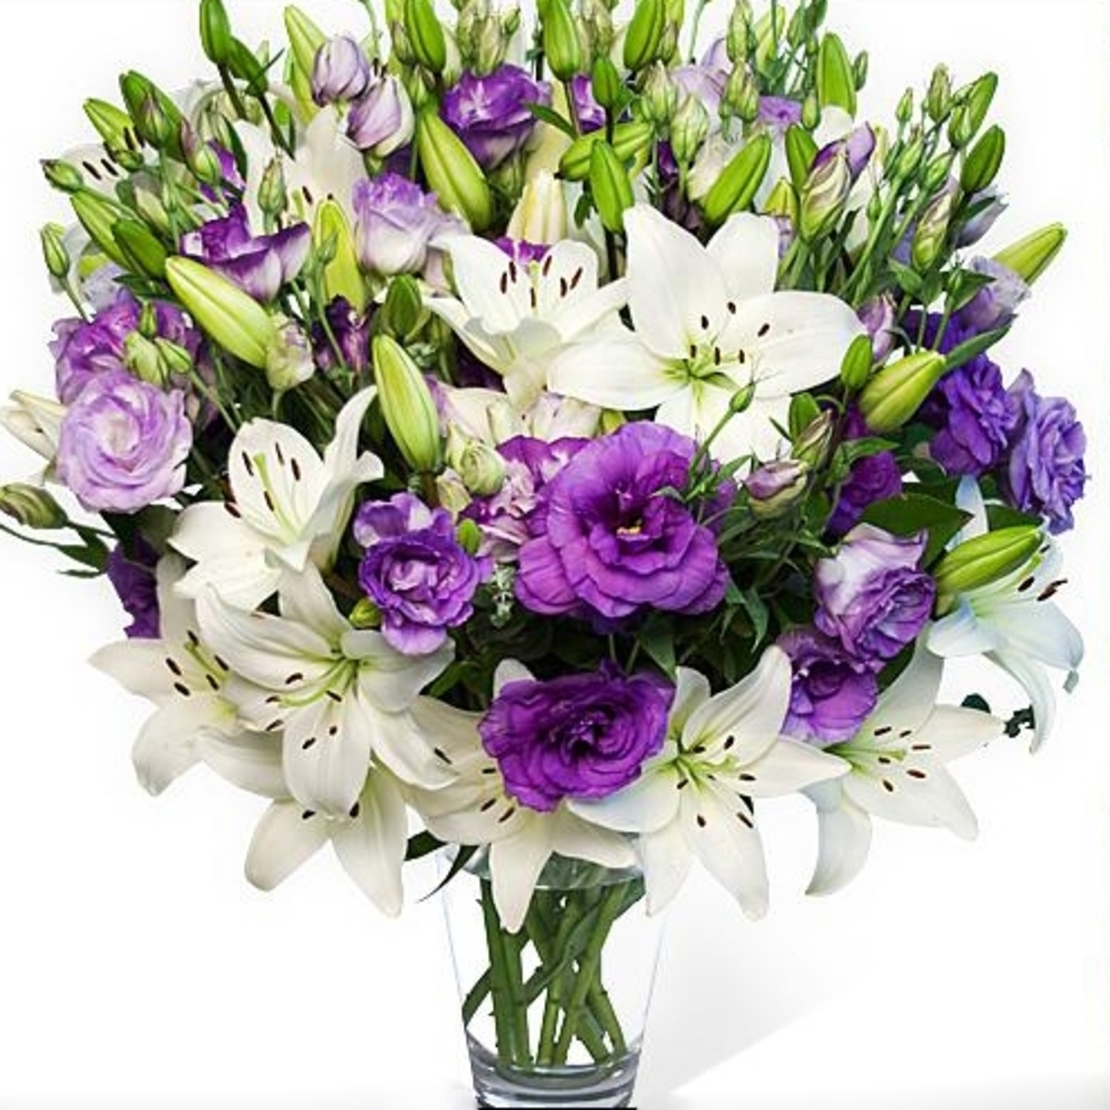 Bouquet of purple lisianthus and white lily